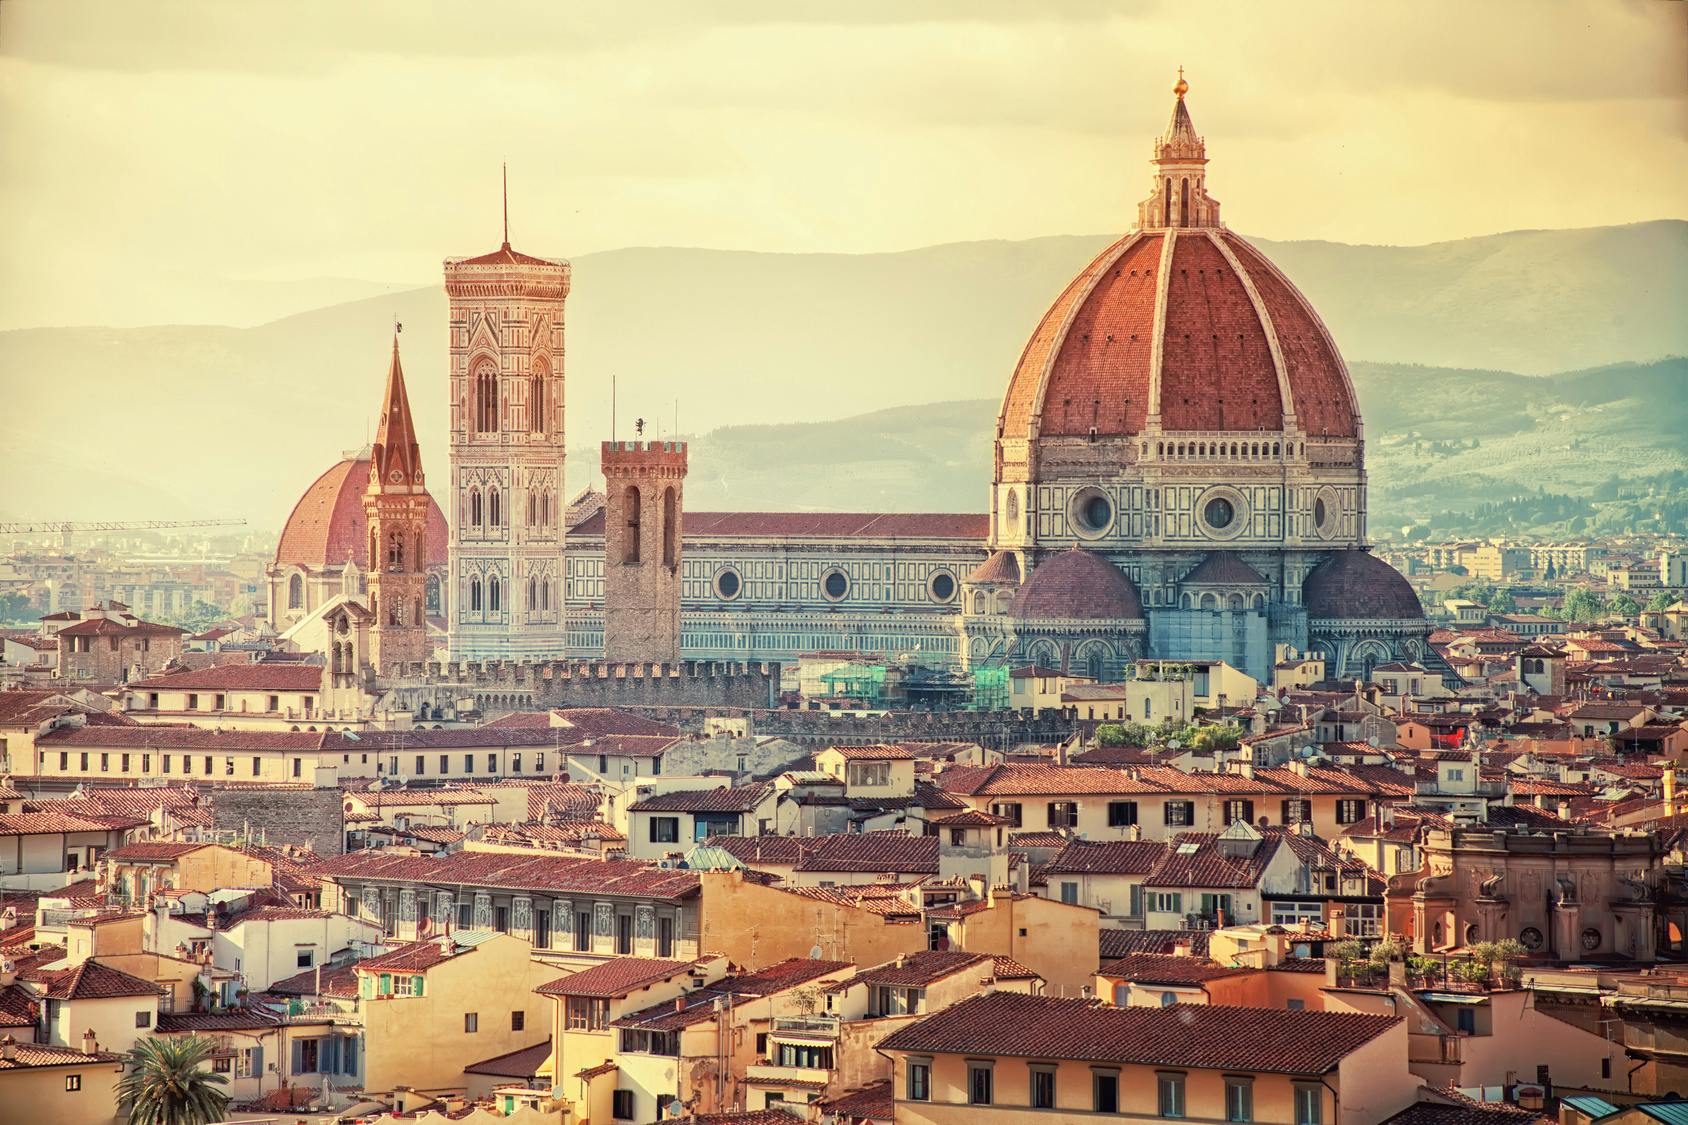 Express guided tour of Florence Duomo with Skip the Line Access Musement